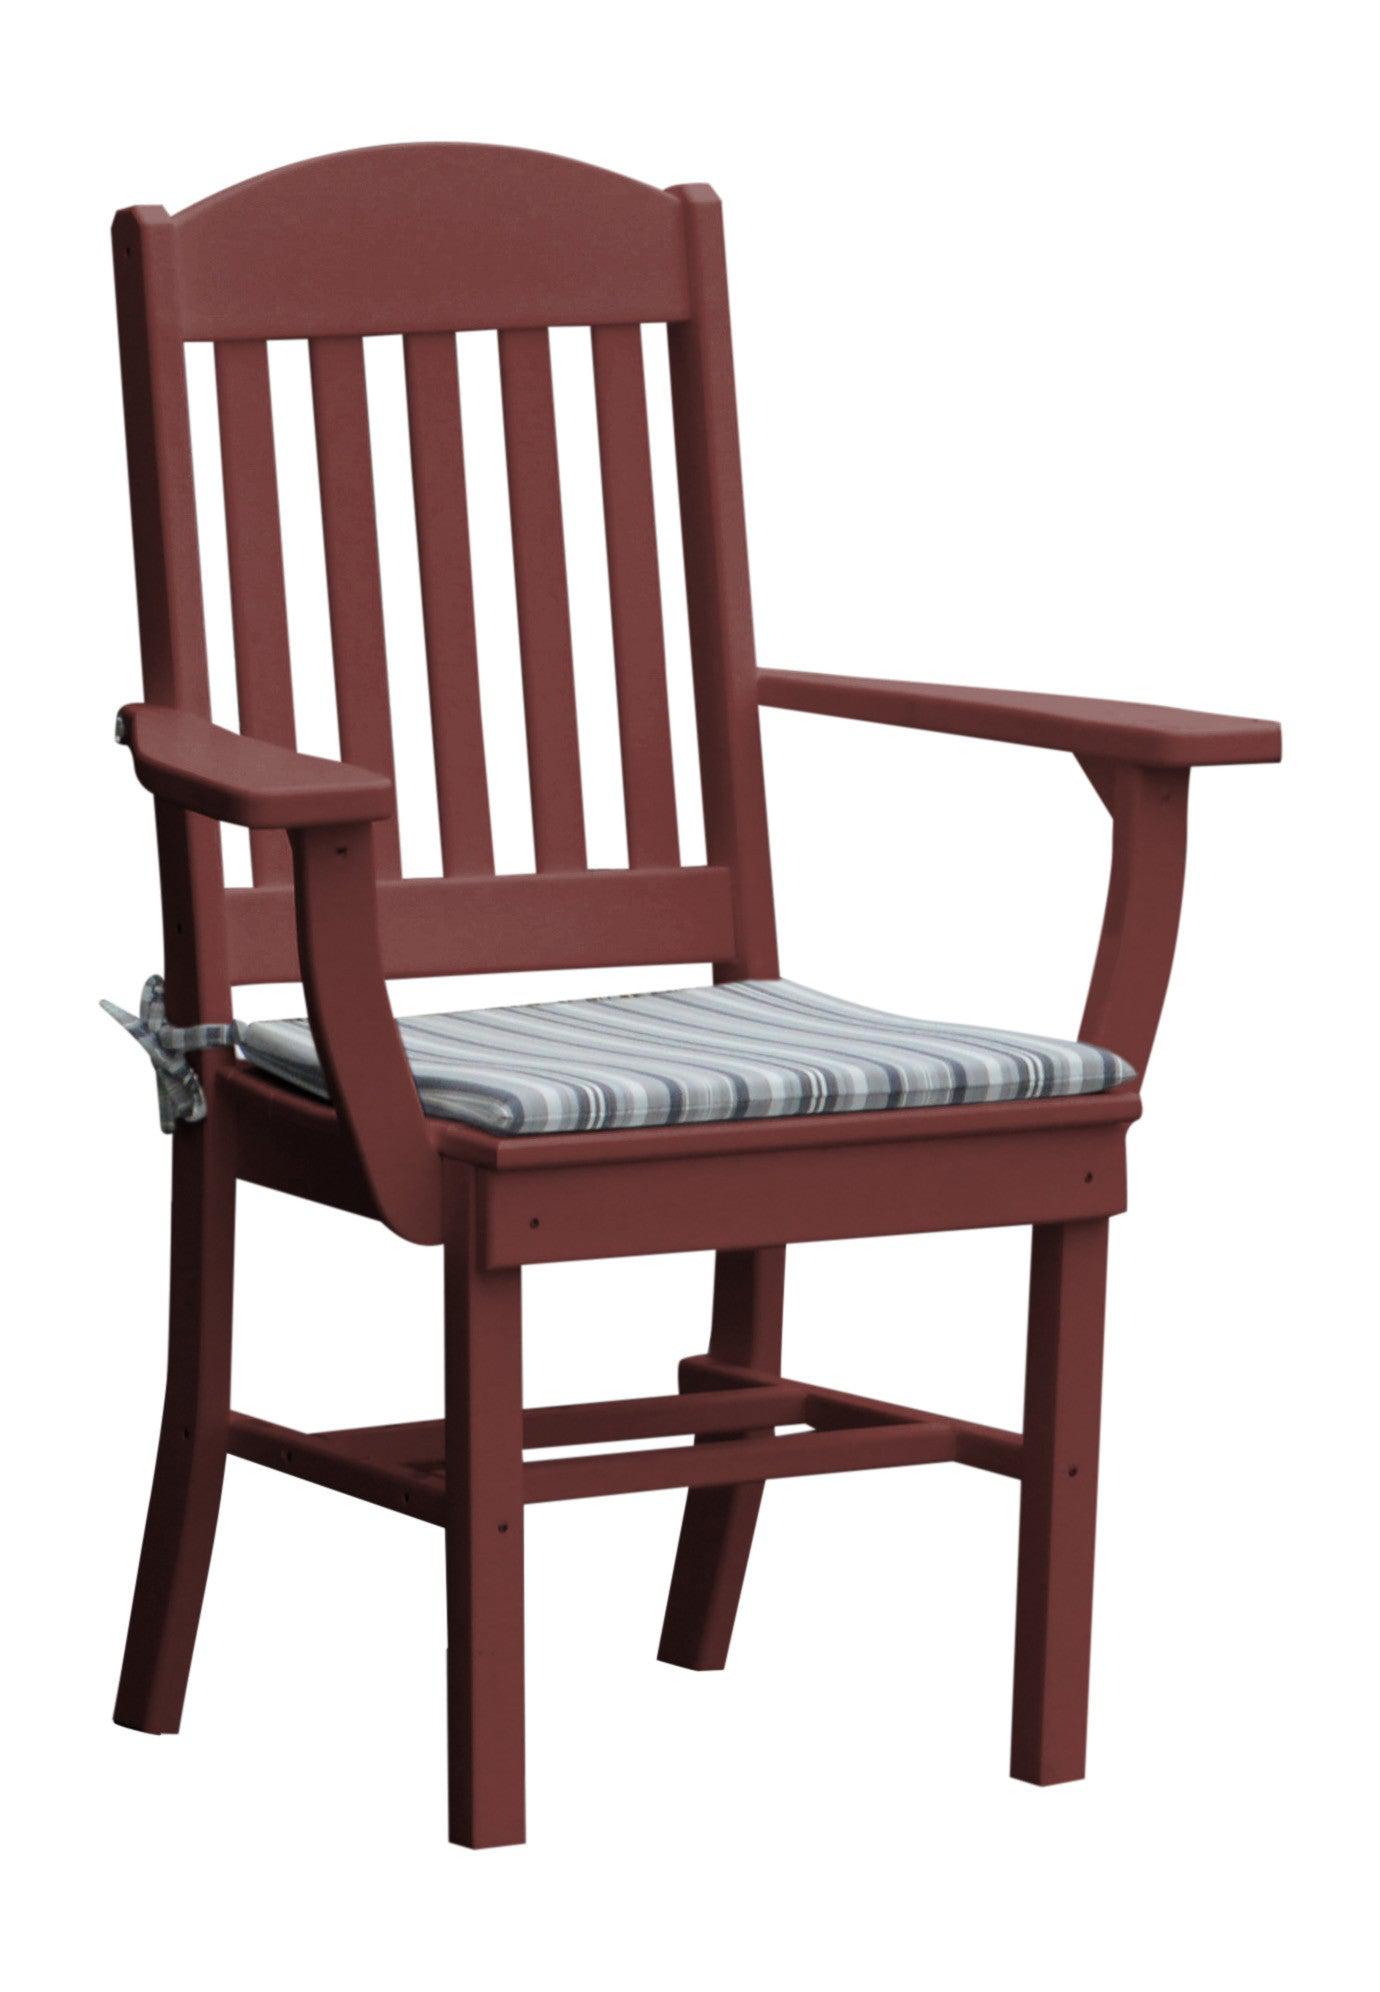 A&L Furniture Company Recycled Plastic Classic Dining Chair w/ Arms - Cherrywood